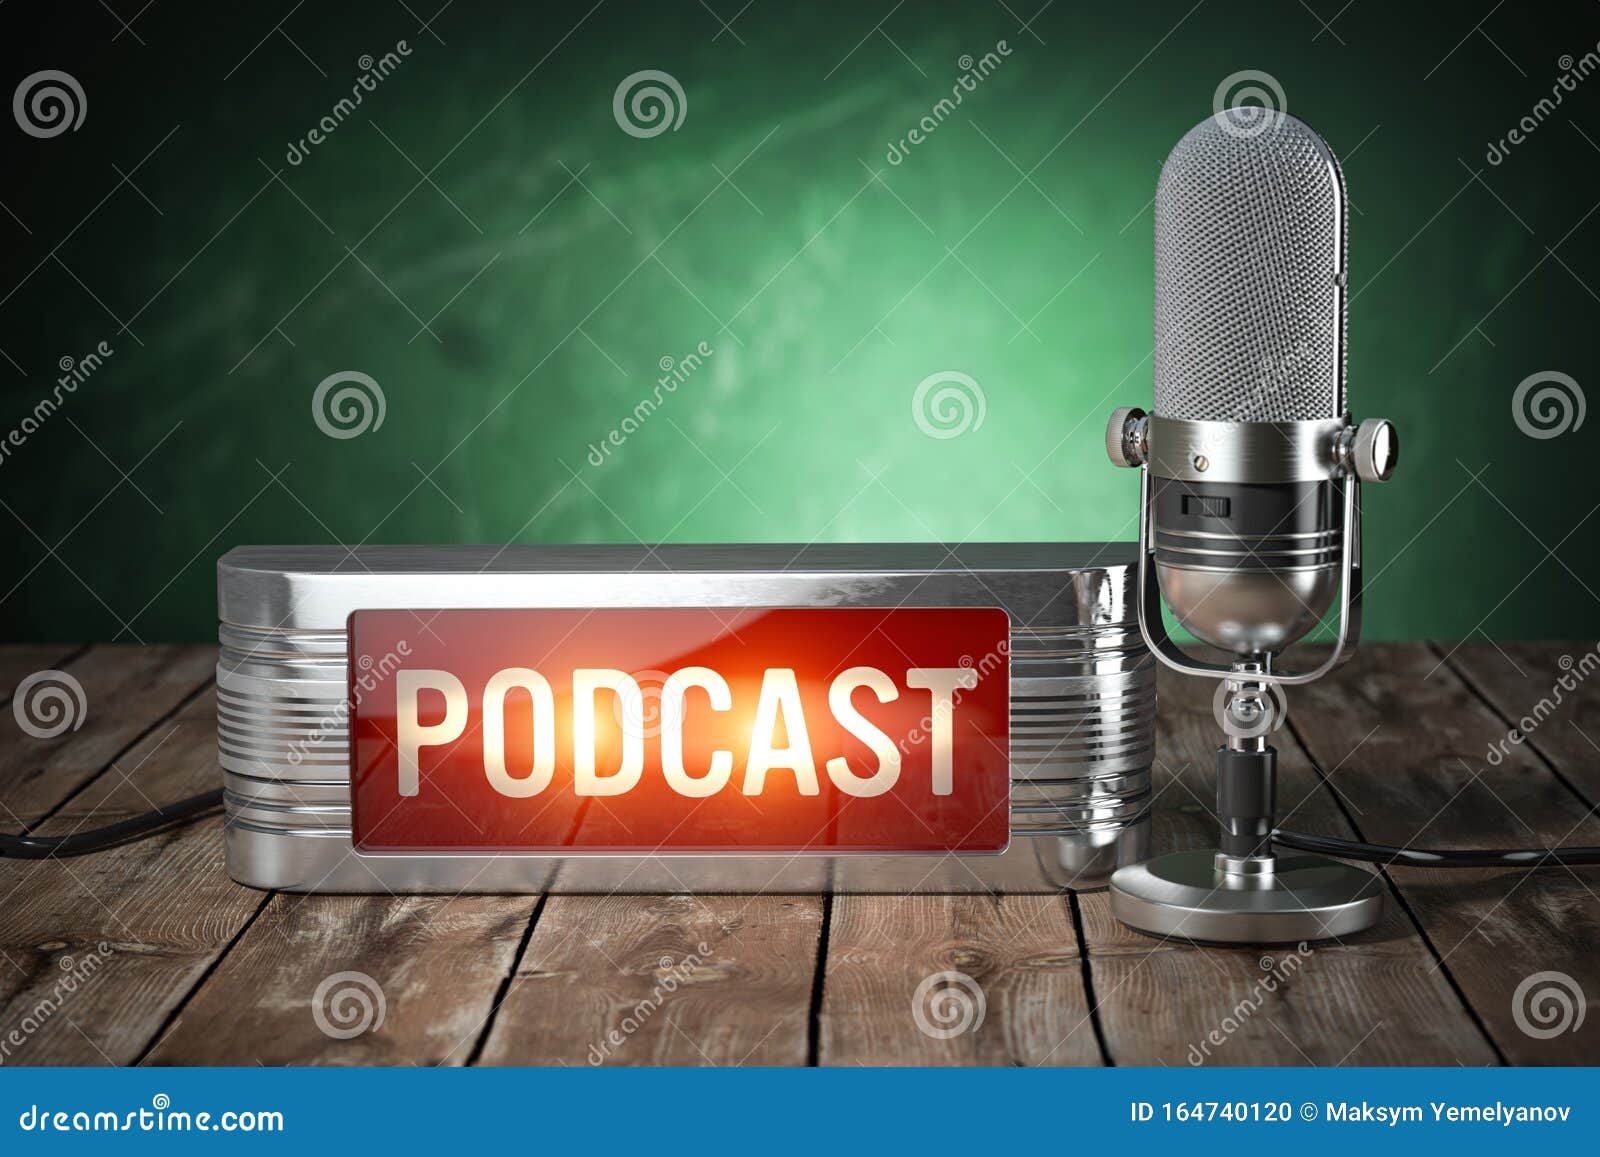 podcast. vintage microphone and signboard with text podcast